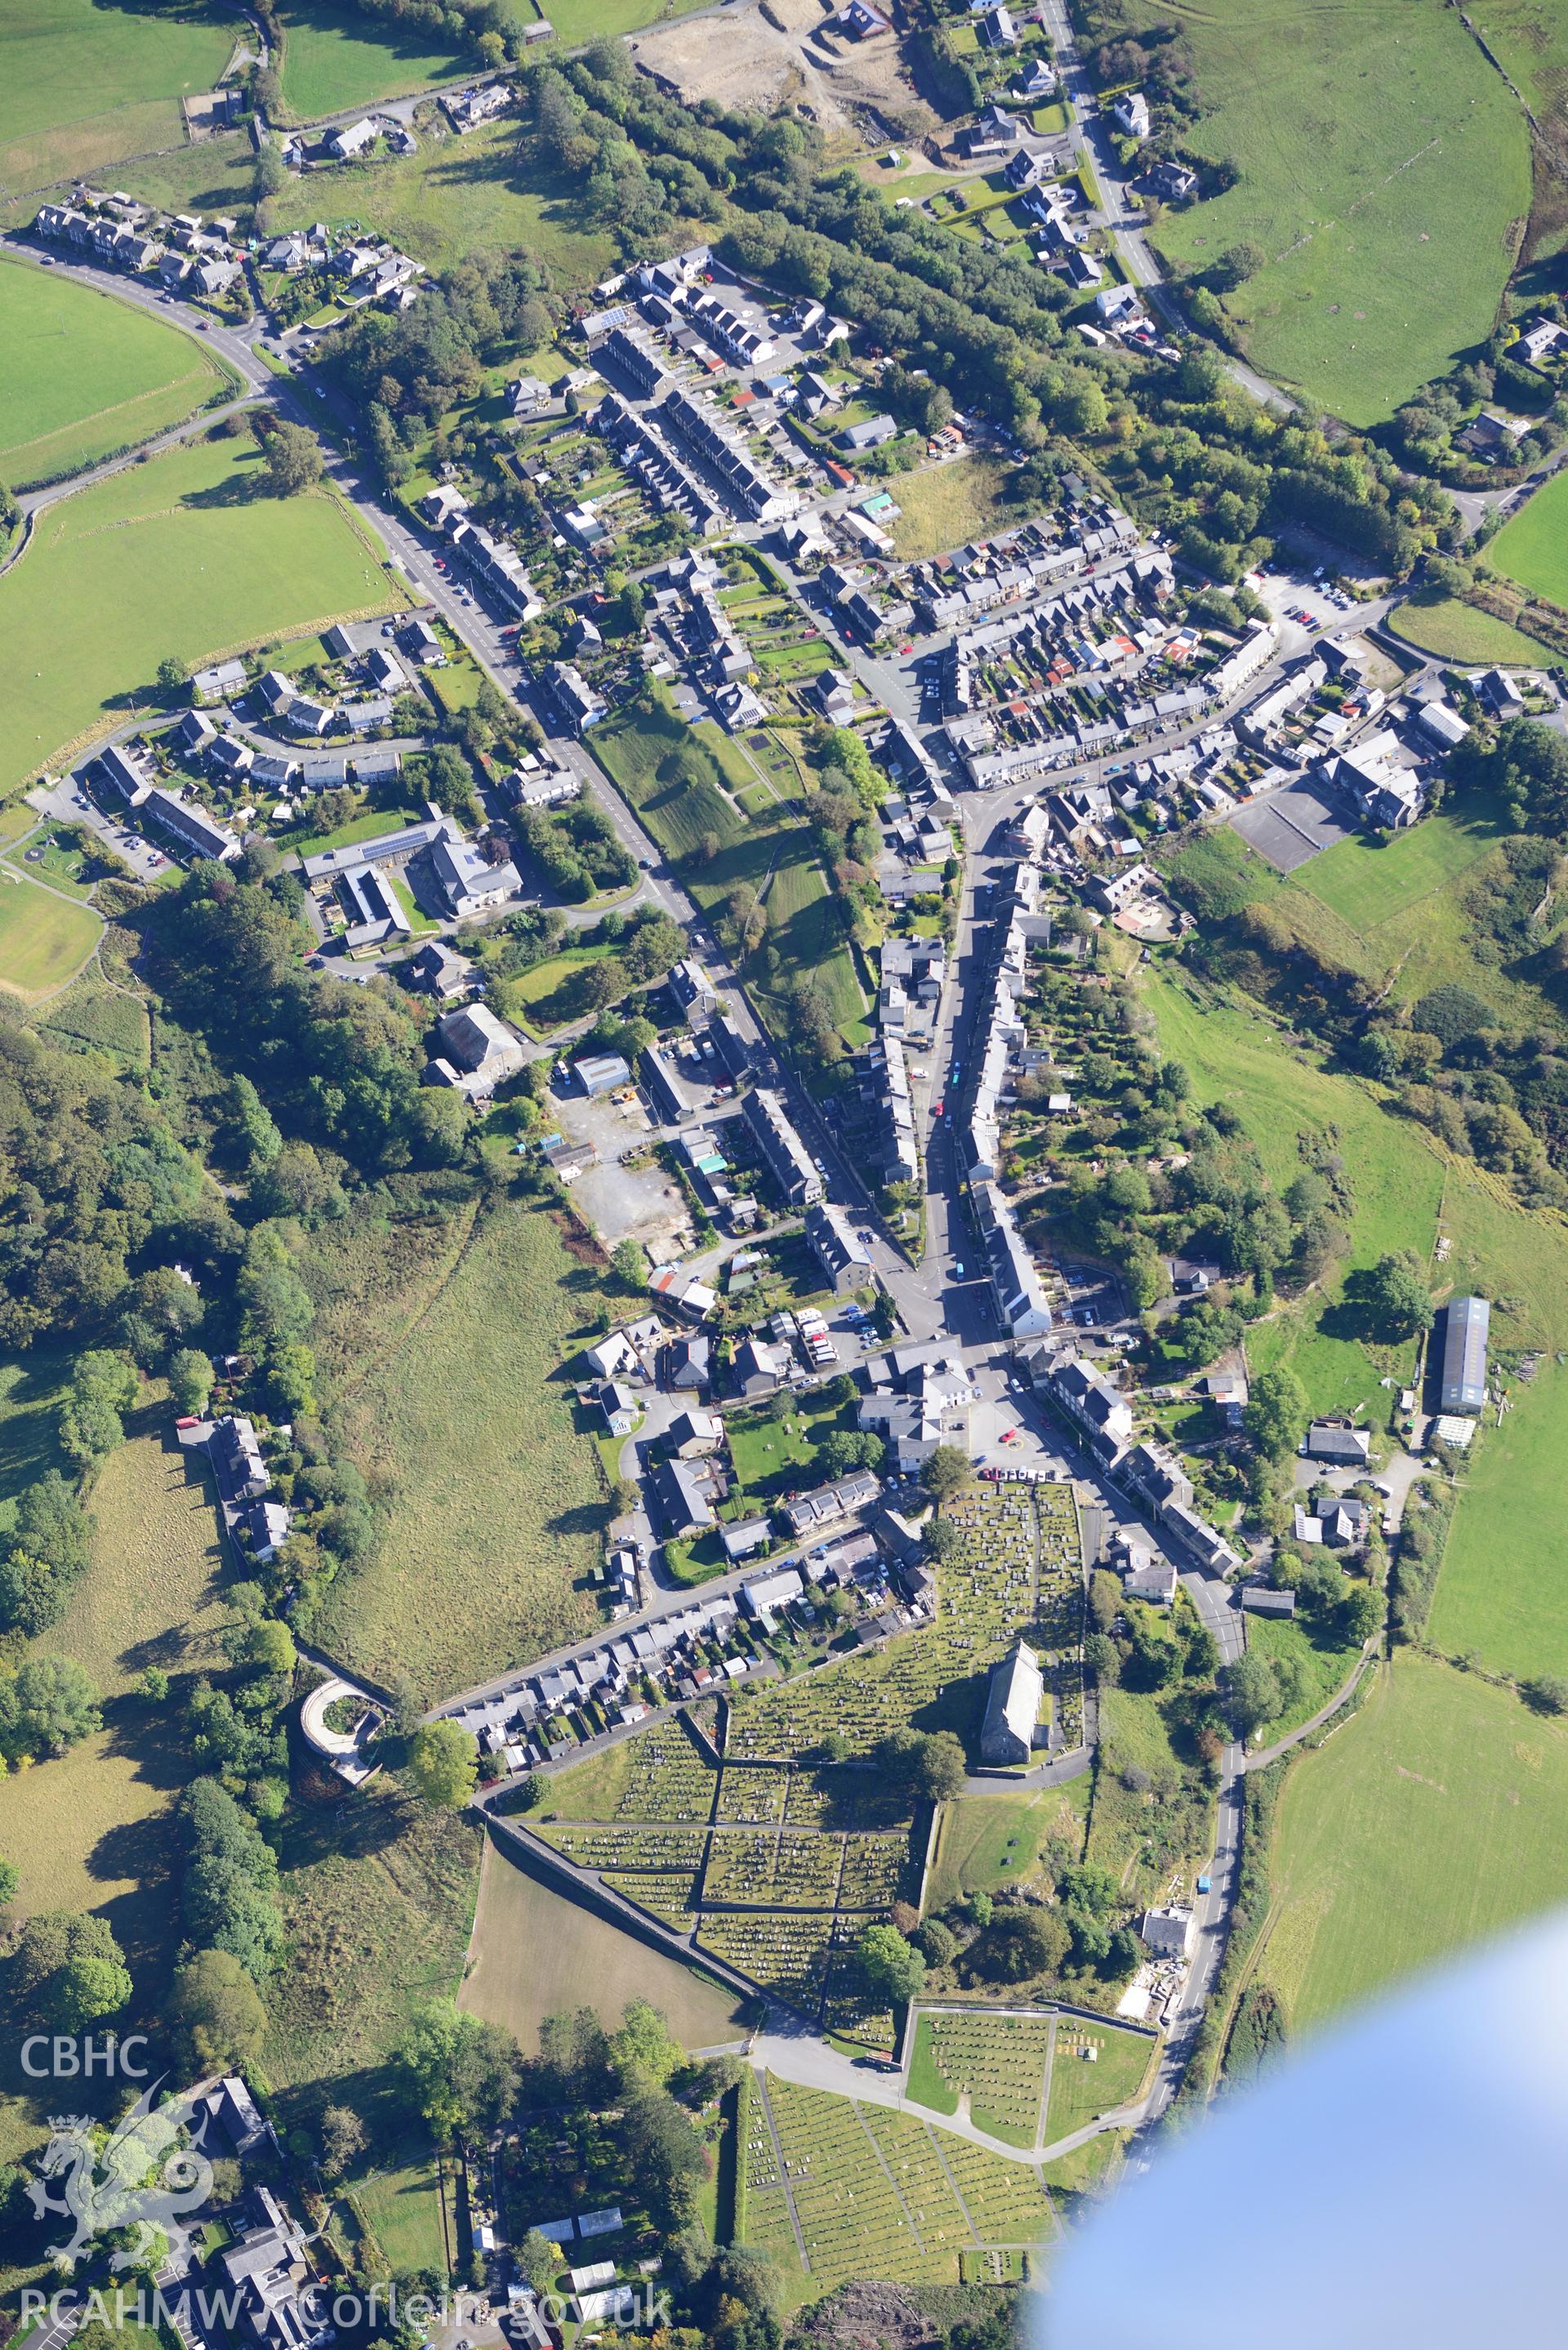 St Michael's church and the village of Llan Ffestiniog. Oblique aerial photograph taken during the Royal Commission's programme of archaeological aerial reconnaissance by Toby Driver on 2nd October 2015.